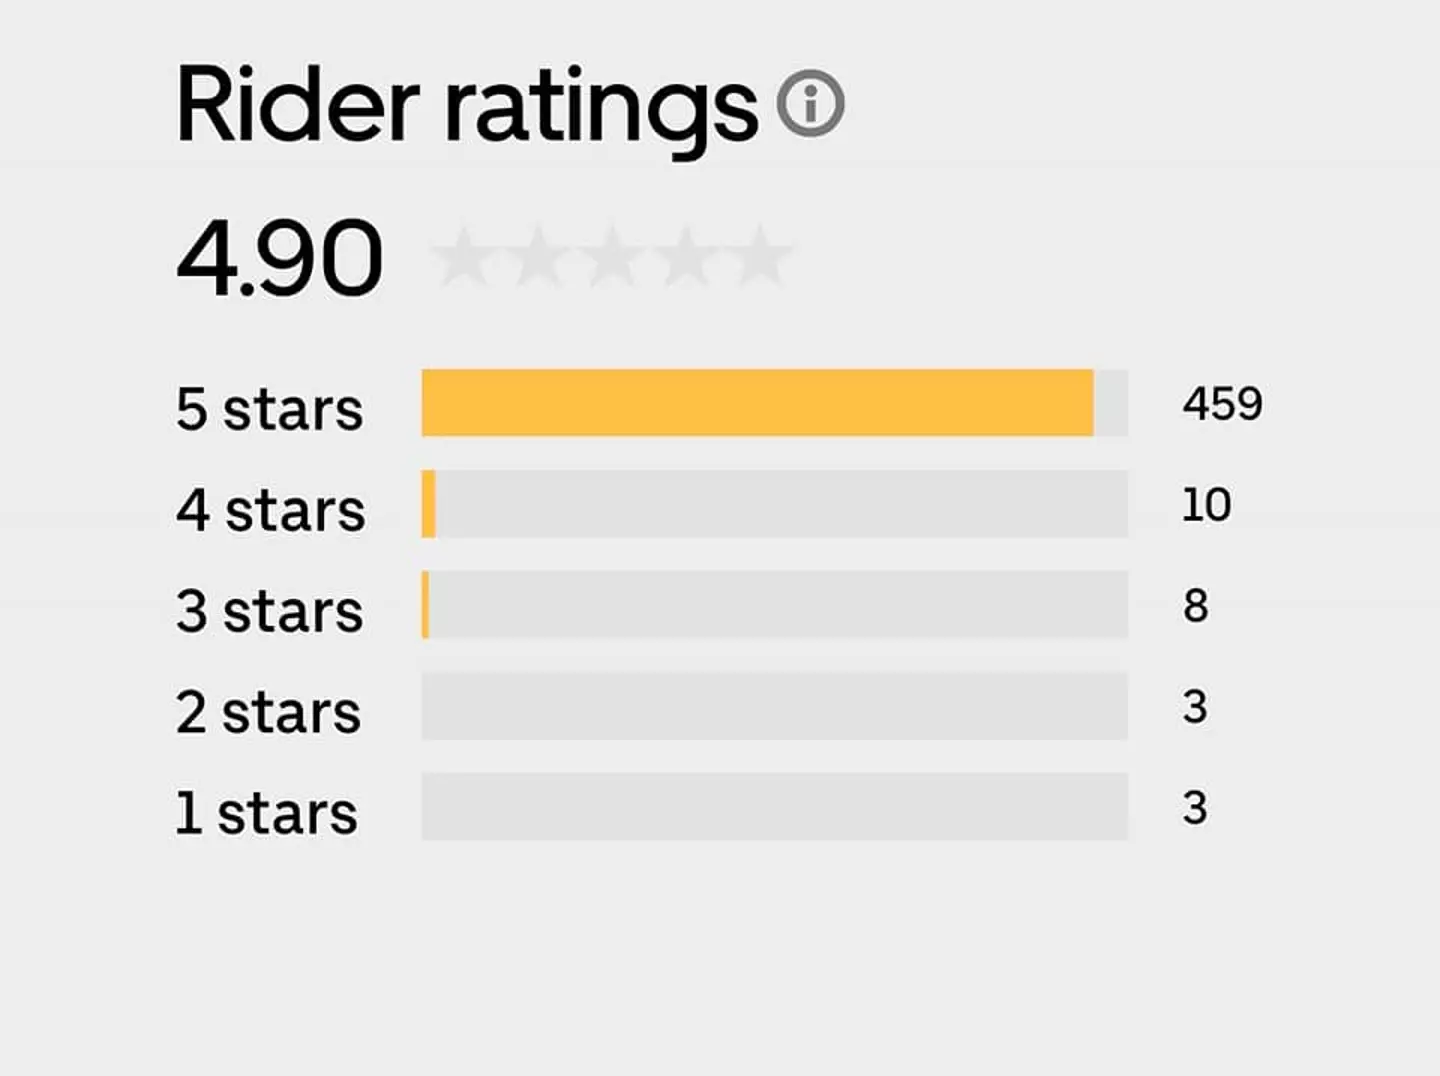 Given the number of journeys this is a very good rating.